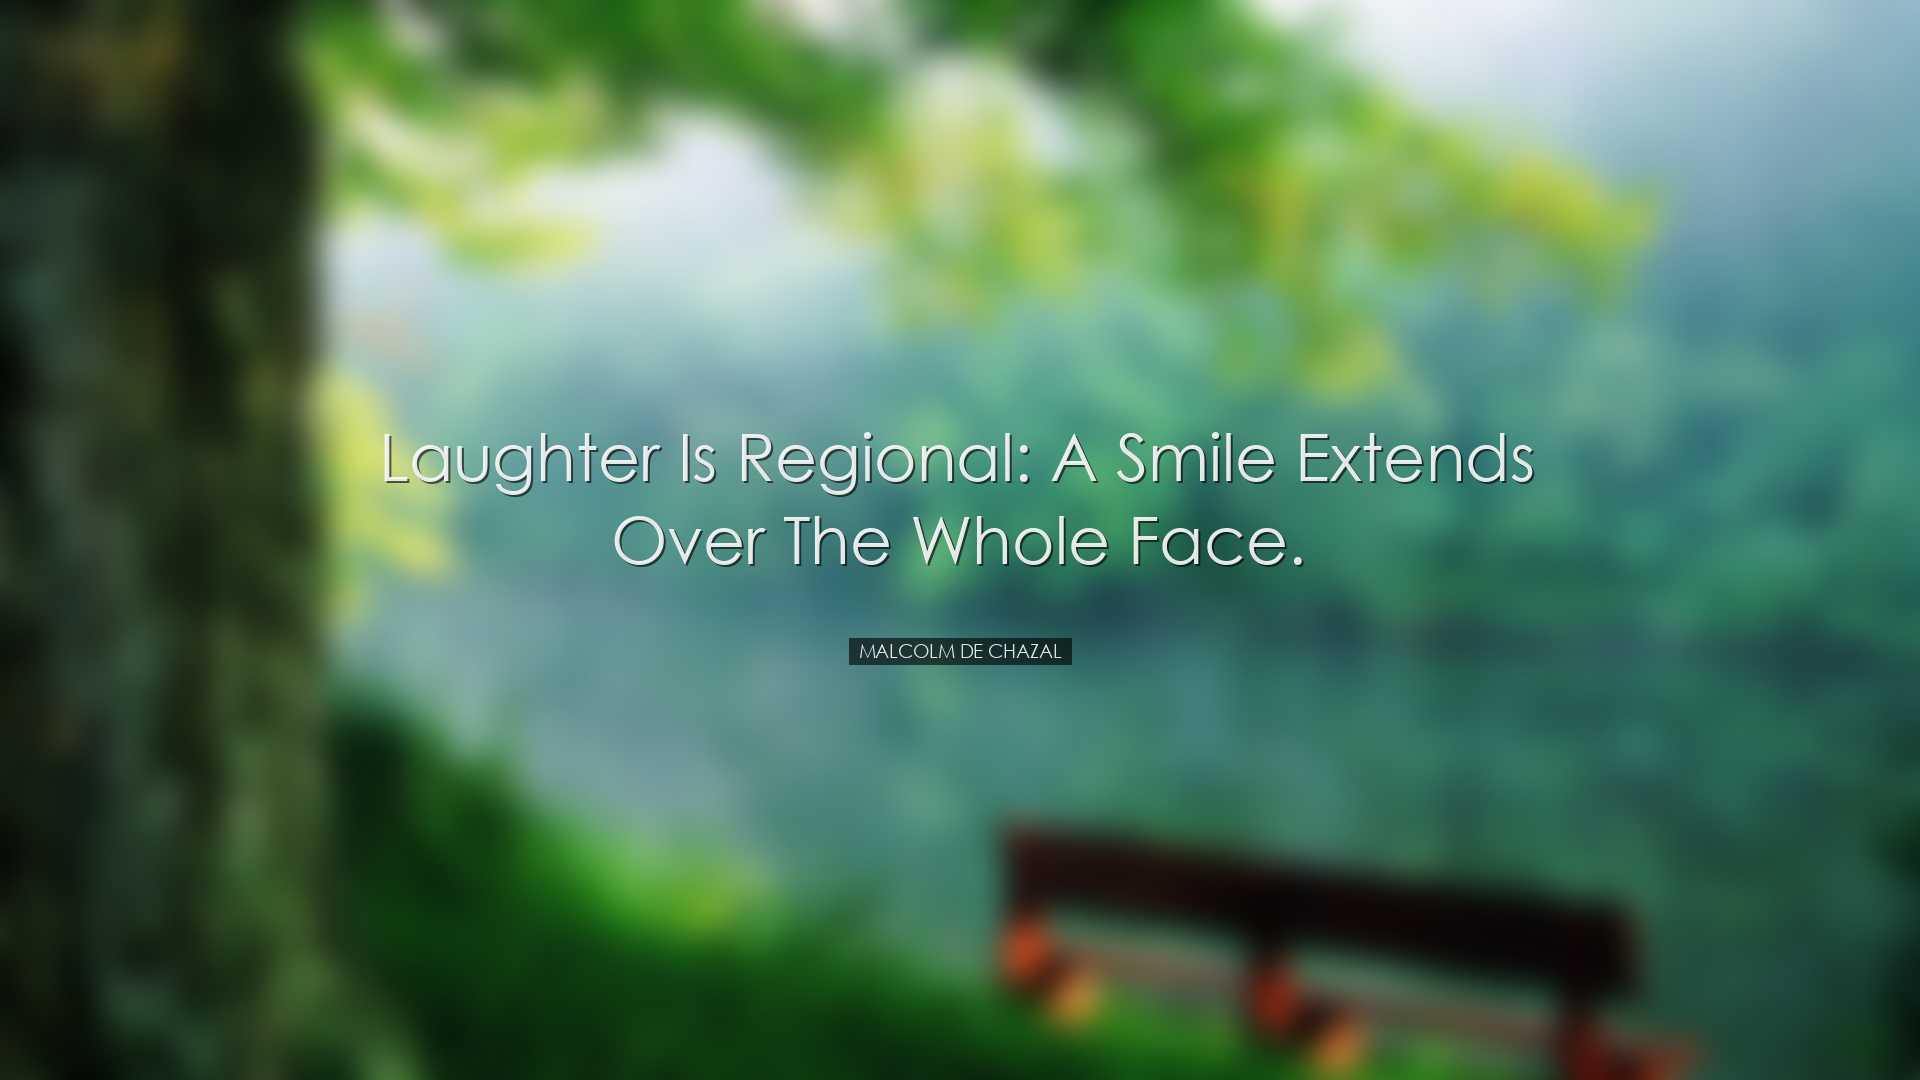 Laughter is regional: a smile extends over the whole face. - Malco